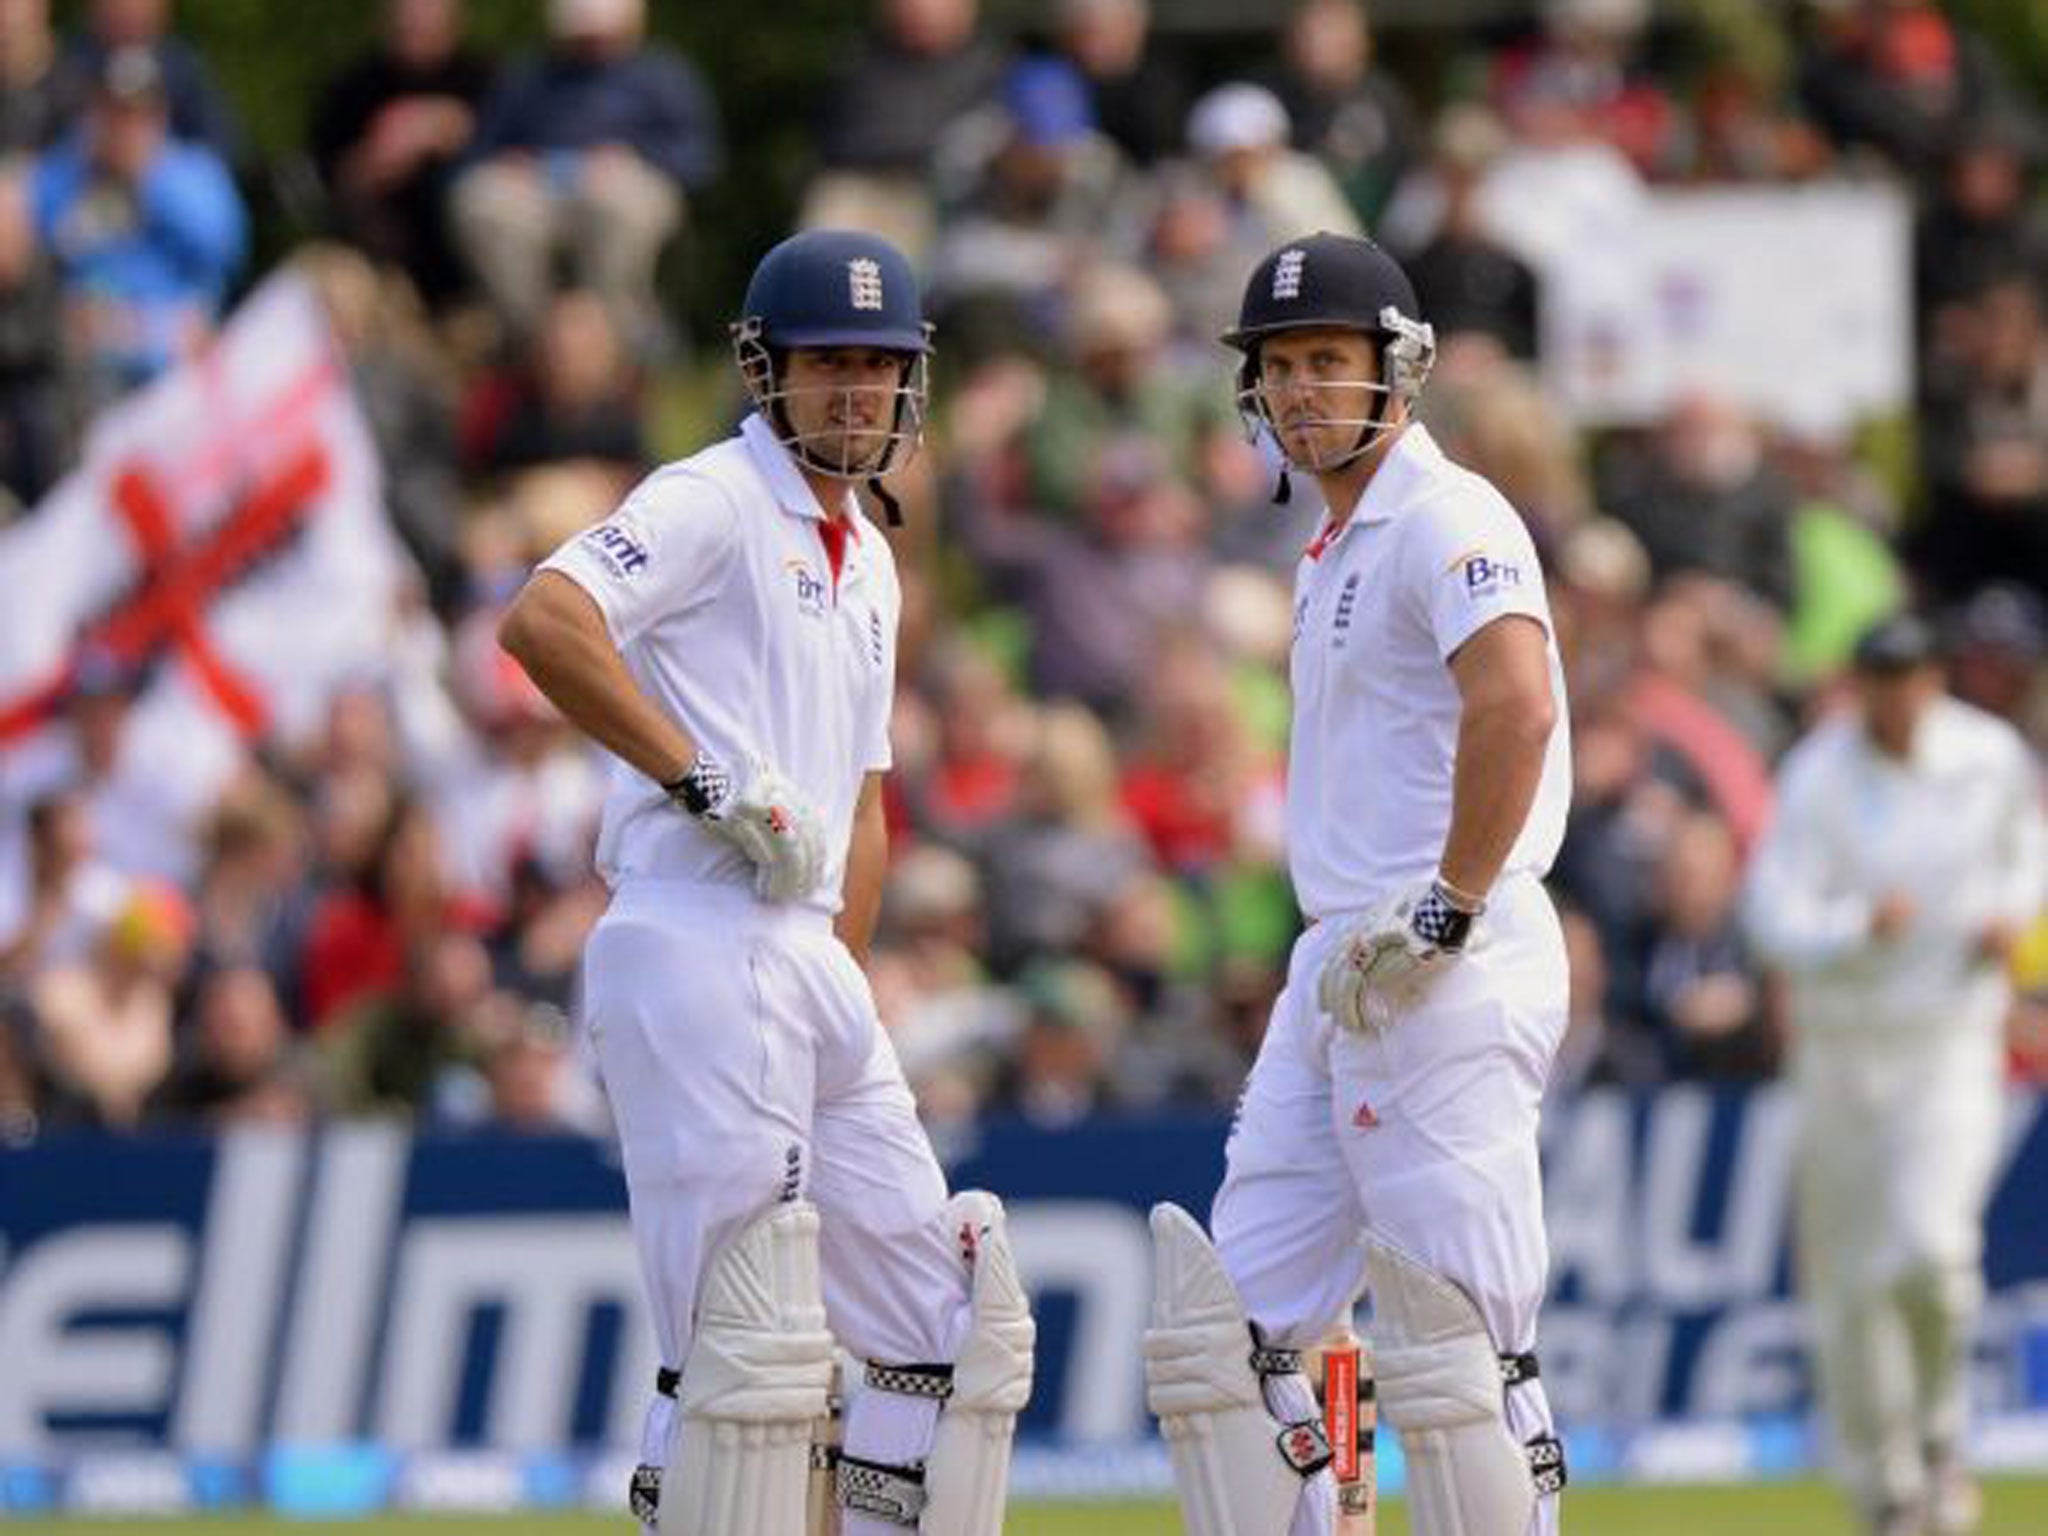 Alastair Cook (left) and Nick Compton average 75.5 as a pair when opening the batting for England